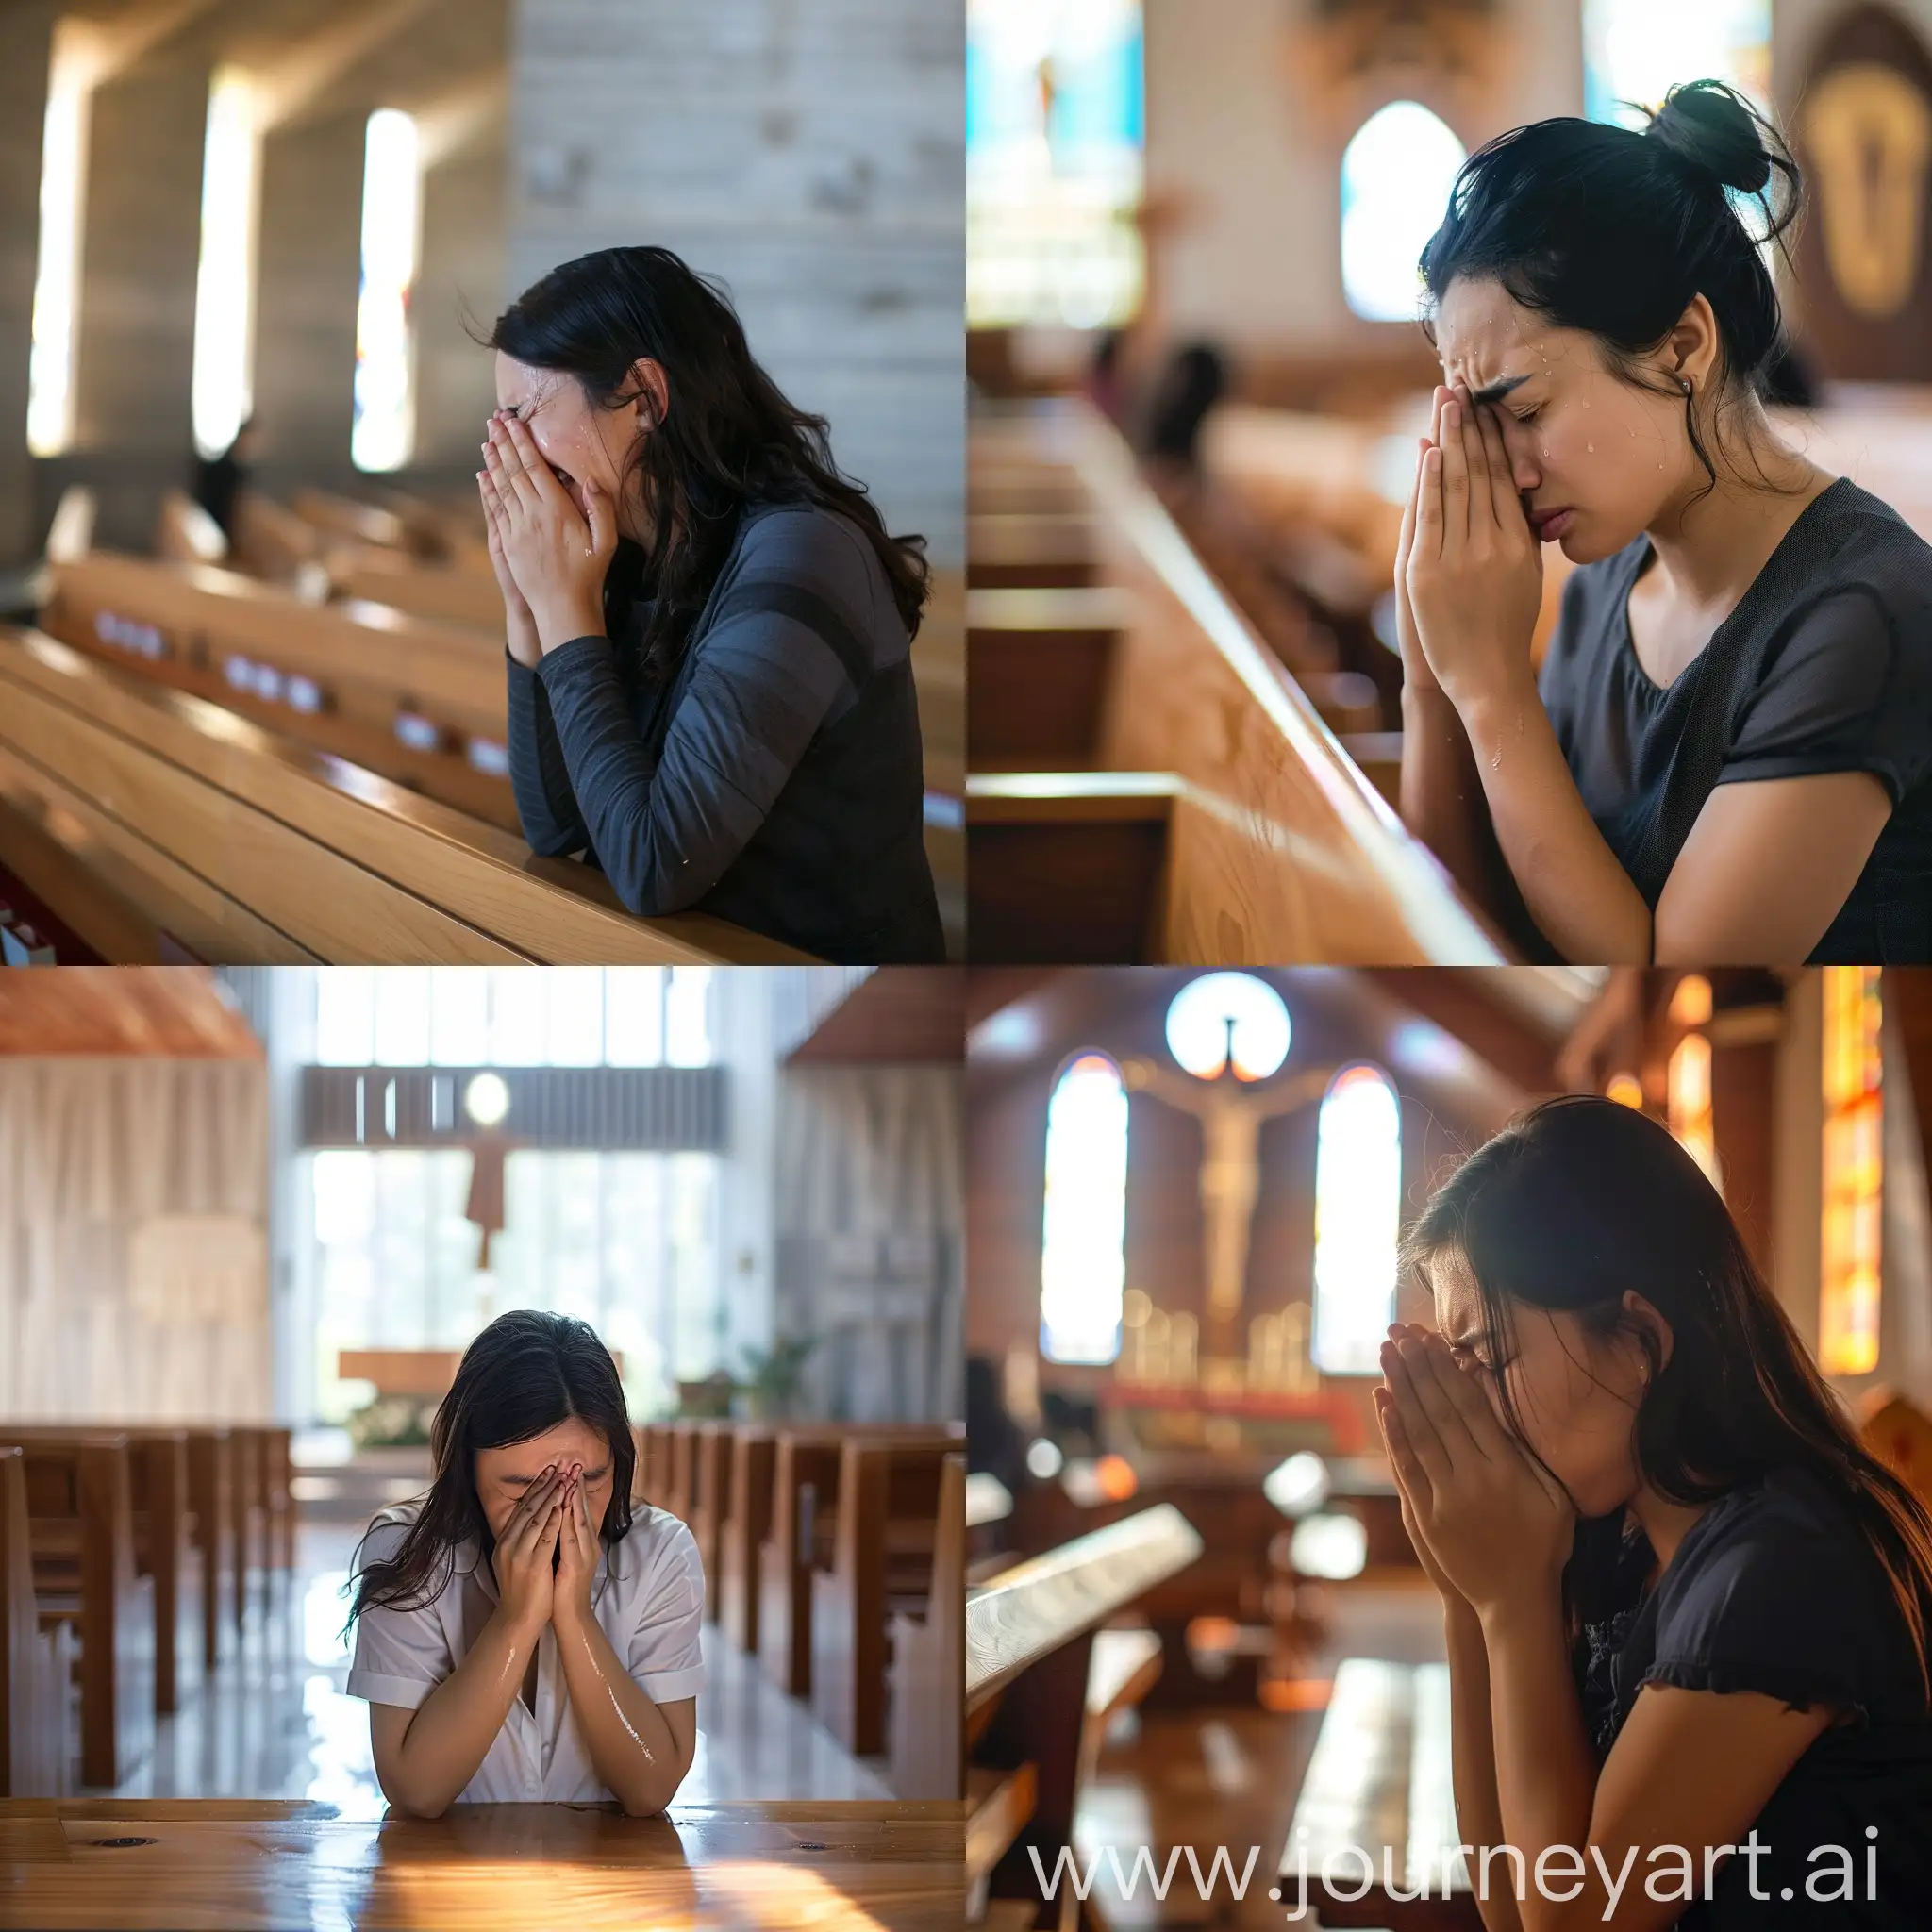 Woman-Praying-in-Emotional-Moment-at-Modern-Evangelical-Church